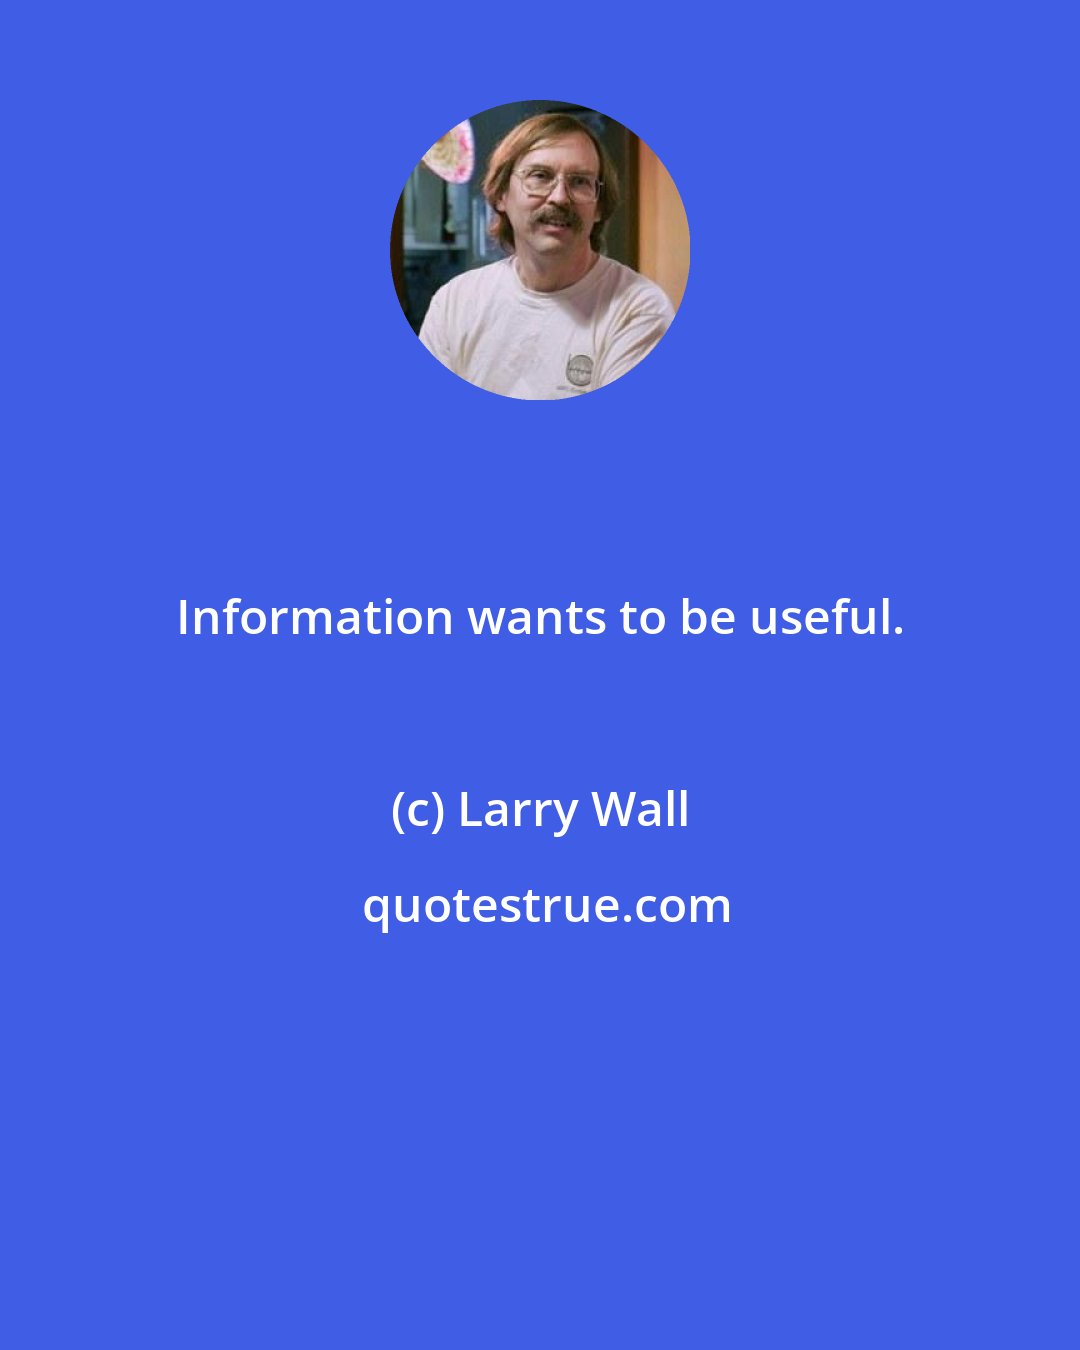 Larry Wall: Information wants to be useful.